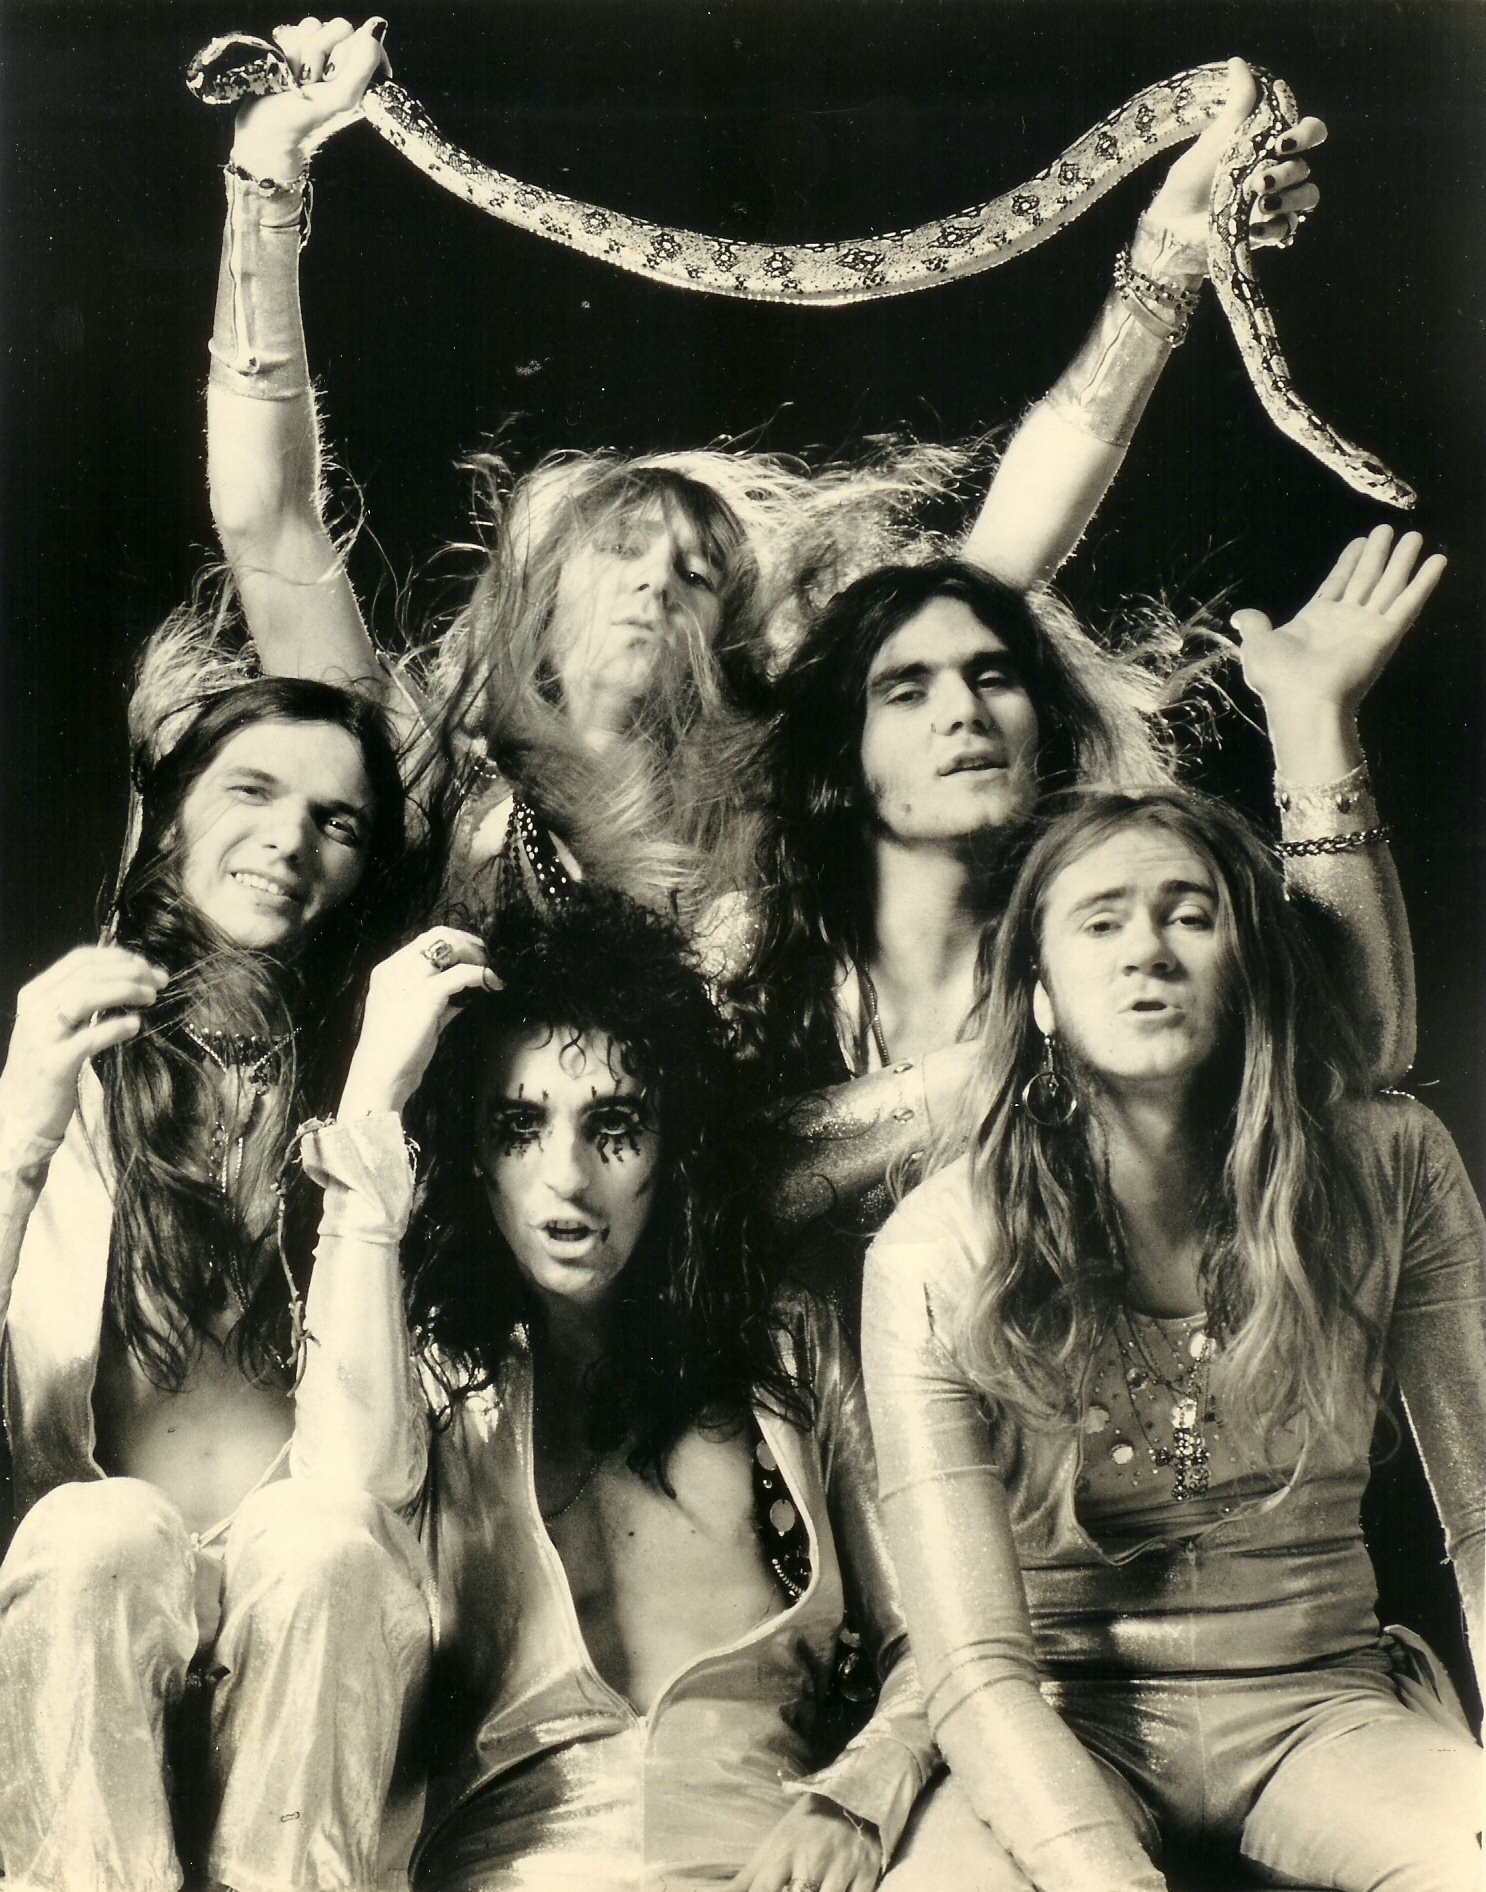 Alice Cooper Band promotional photo